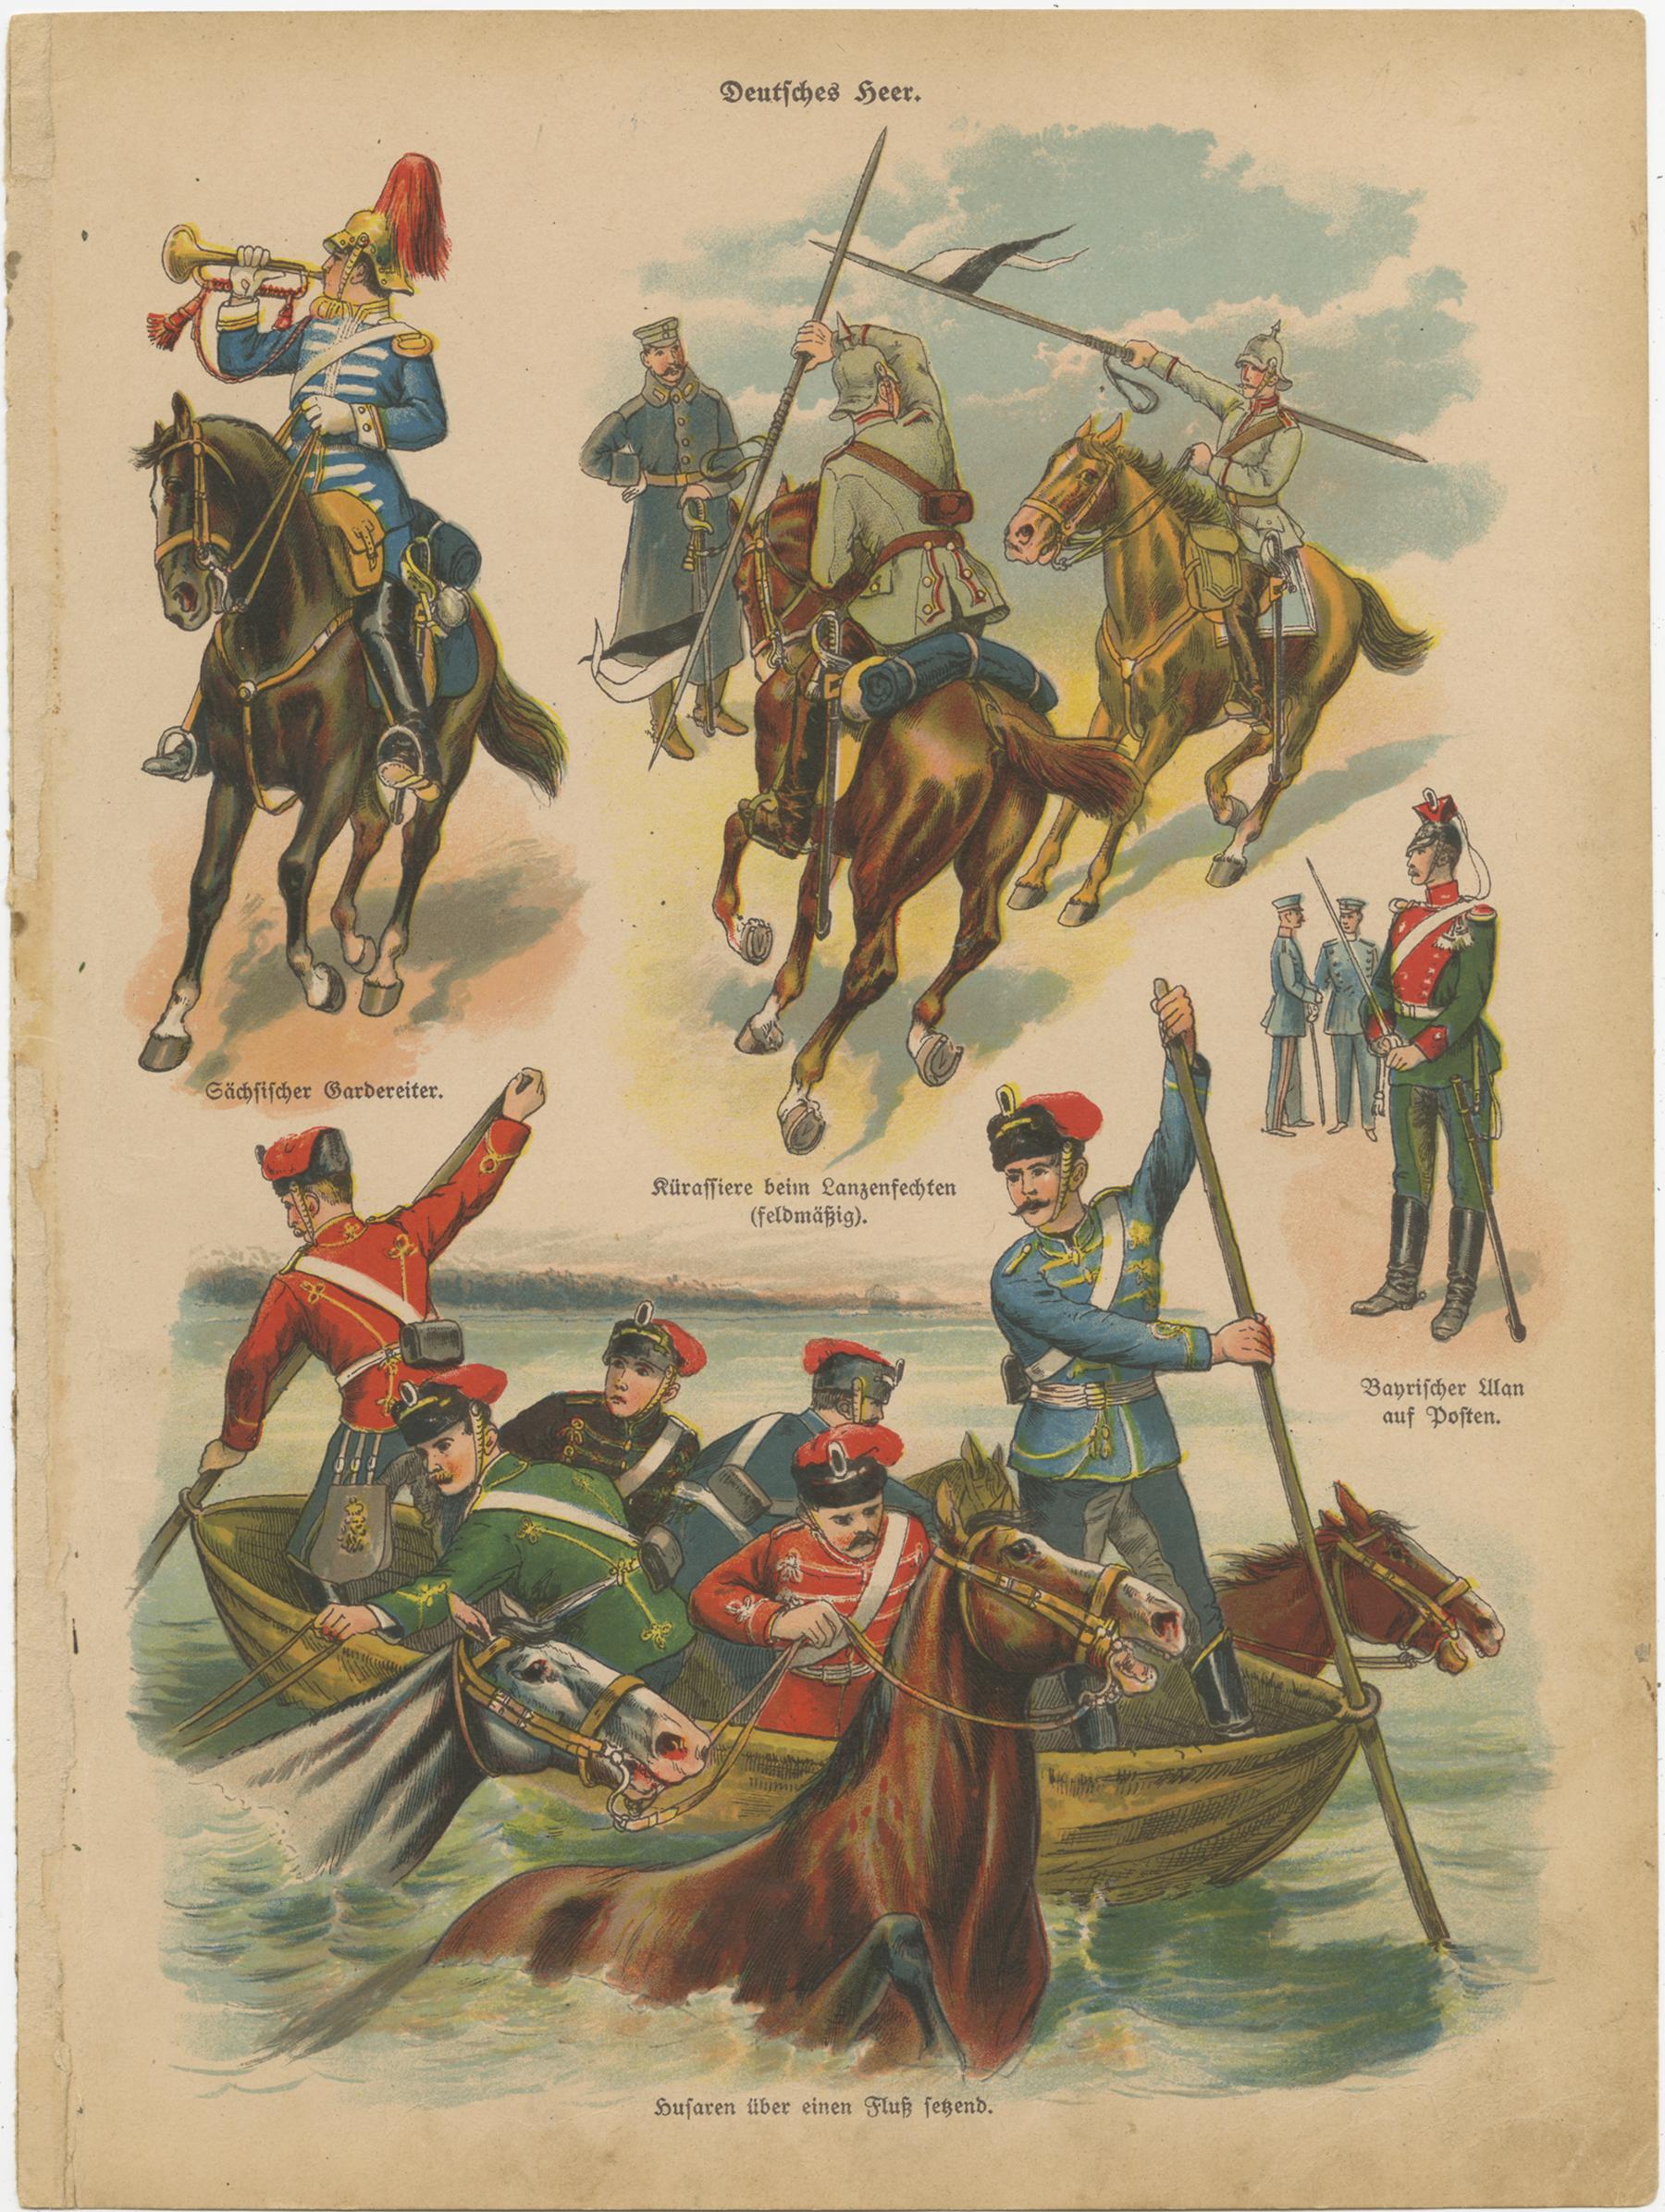 Set of ten original antique prints of military costumes. It shows military costumes of Germany and Hungary. Source unknown, to be determined. Published circa 1900.